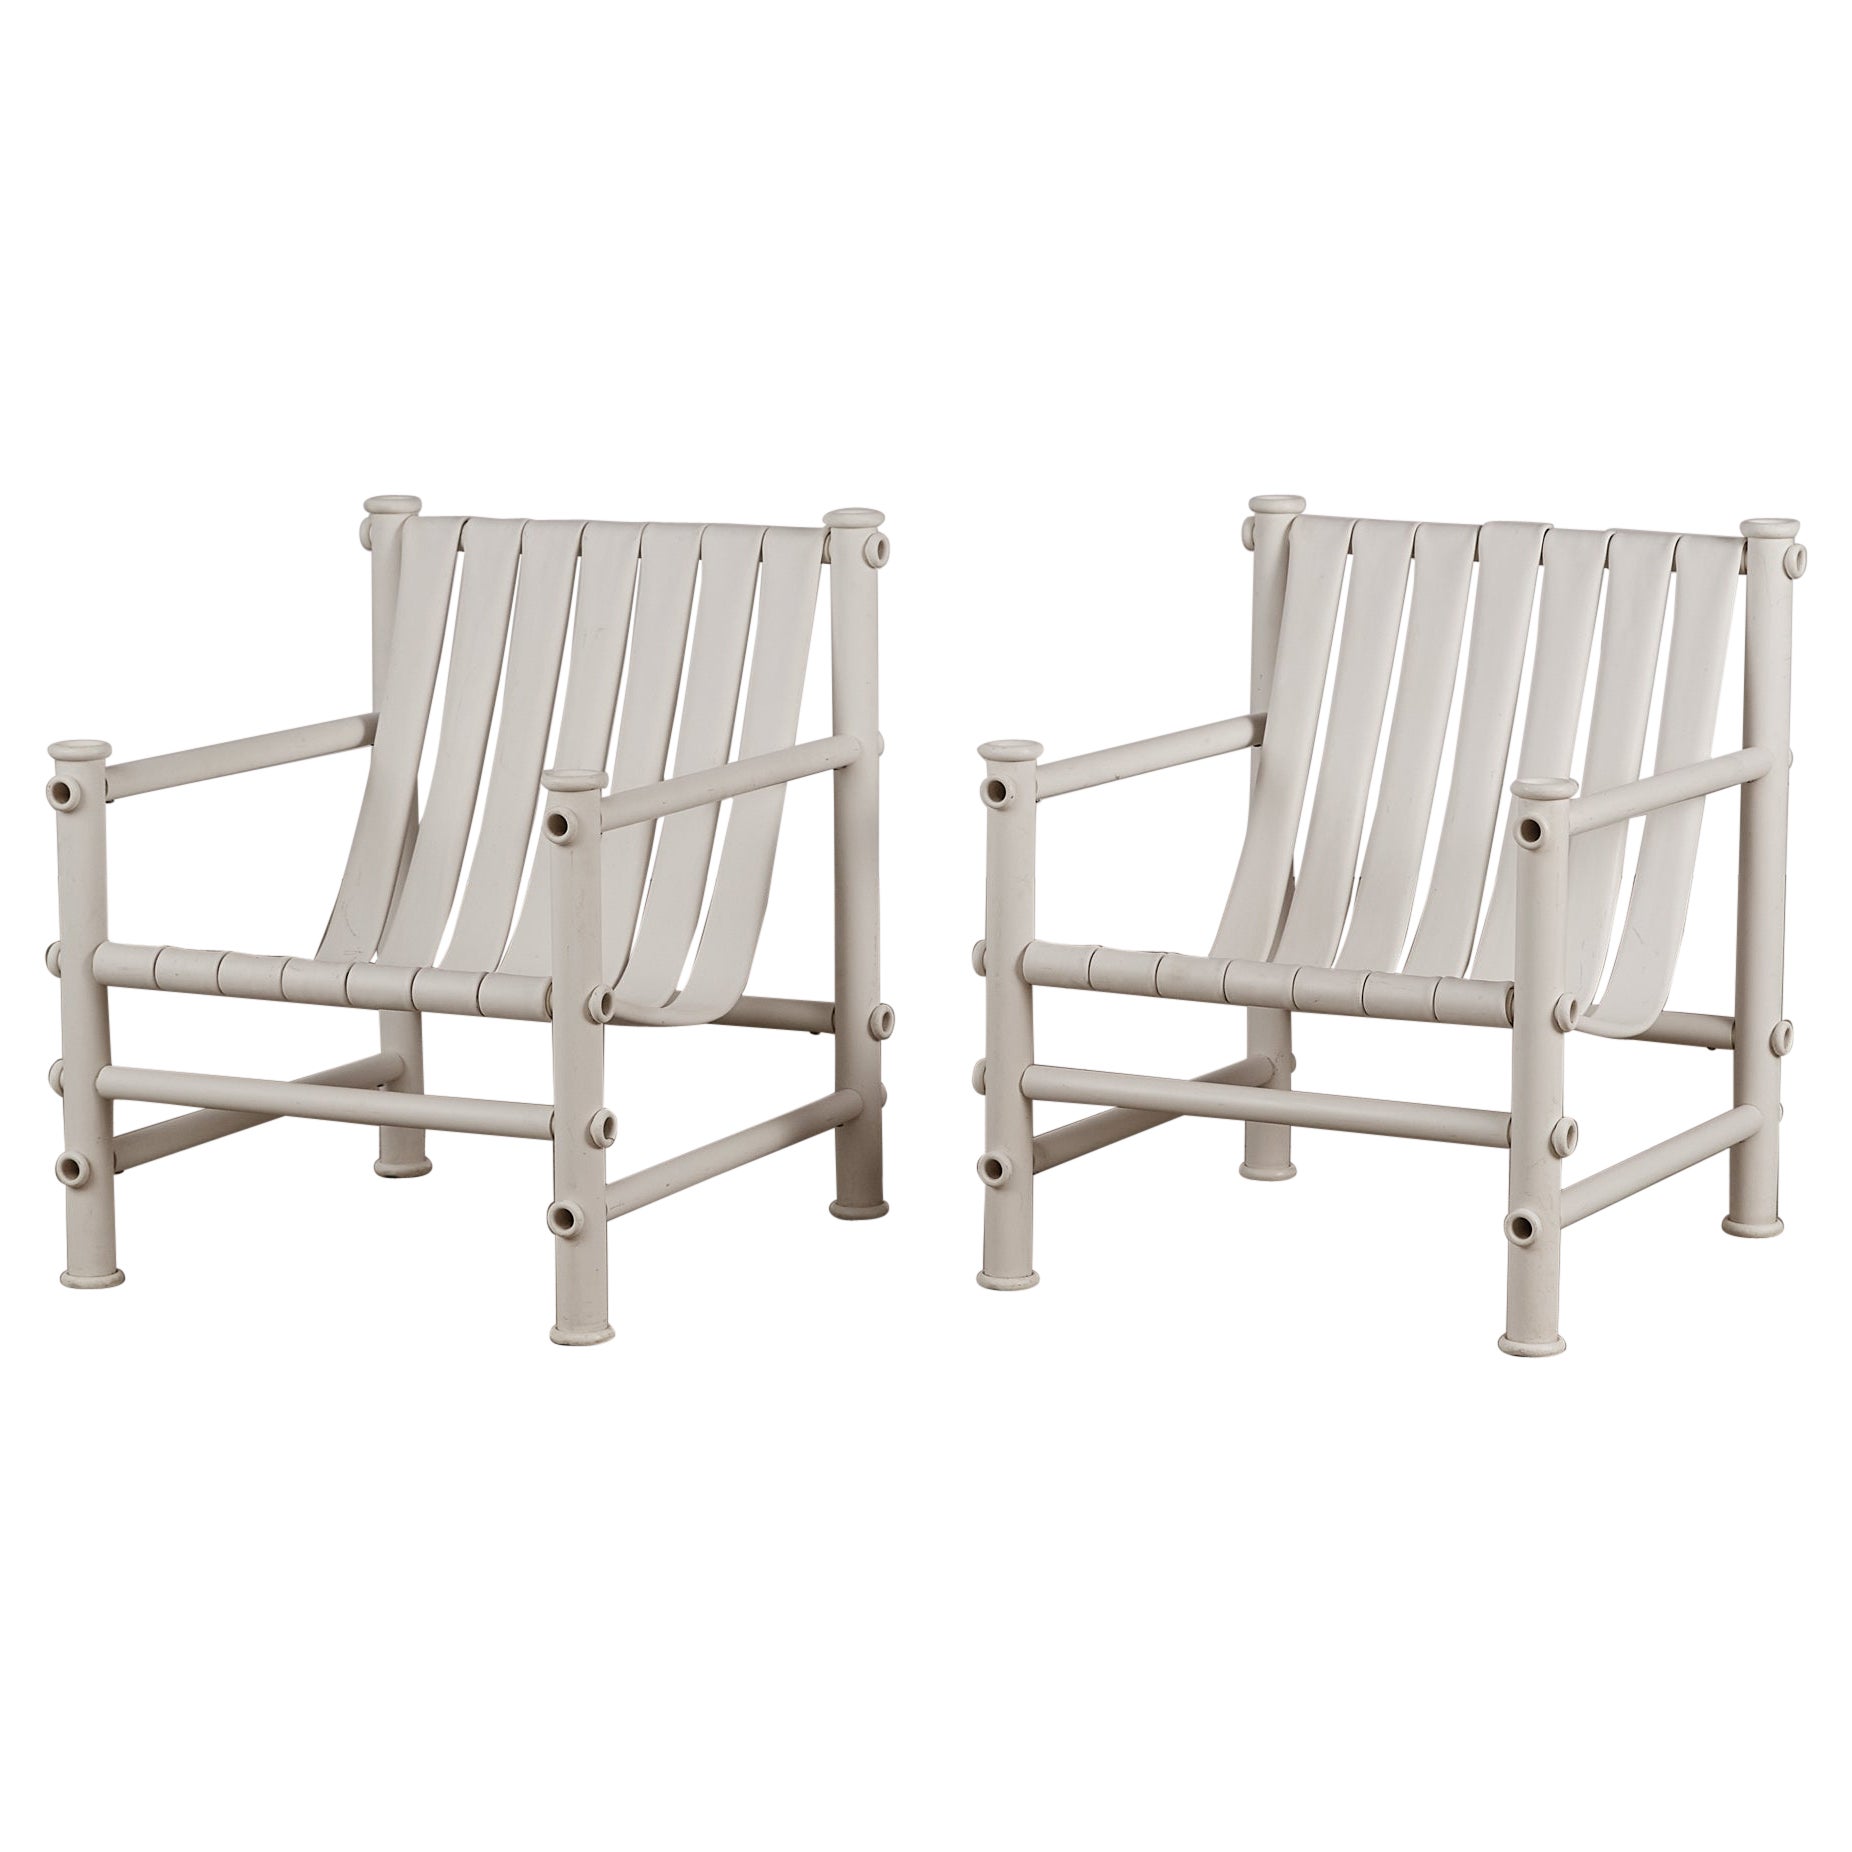 Pair of Jerry Johnson Outdoor "Idyllwild" Lounge Chairs